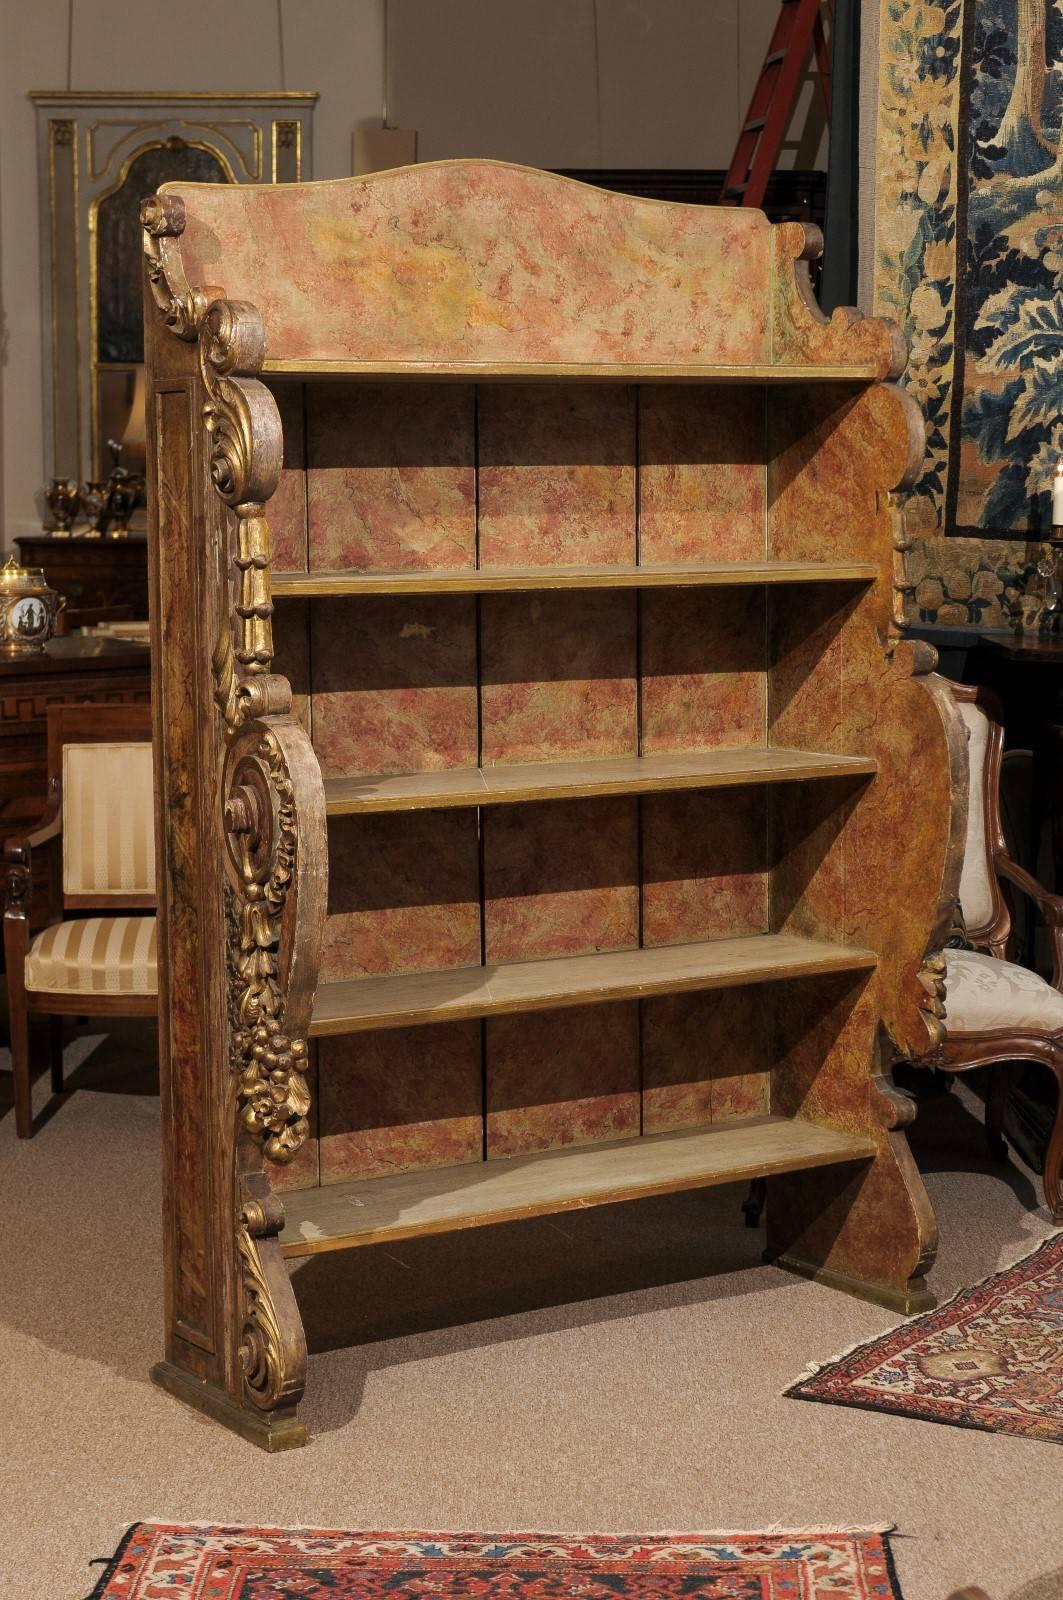 Spanish Rococo style giltwood and polychrome painted open shelf bookcase with five shelves and intricately carved side panels, 20th century.